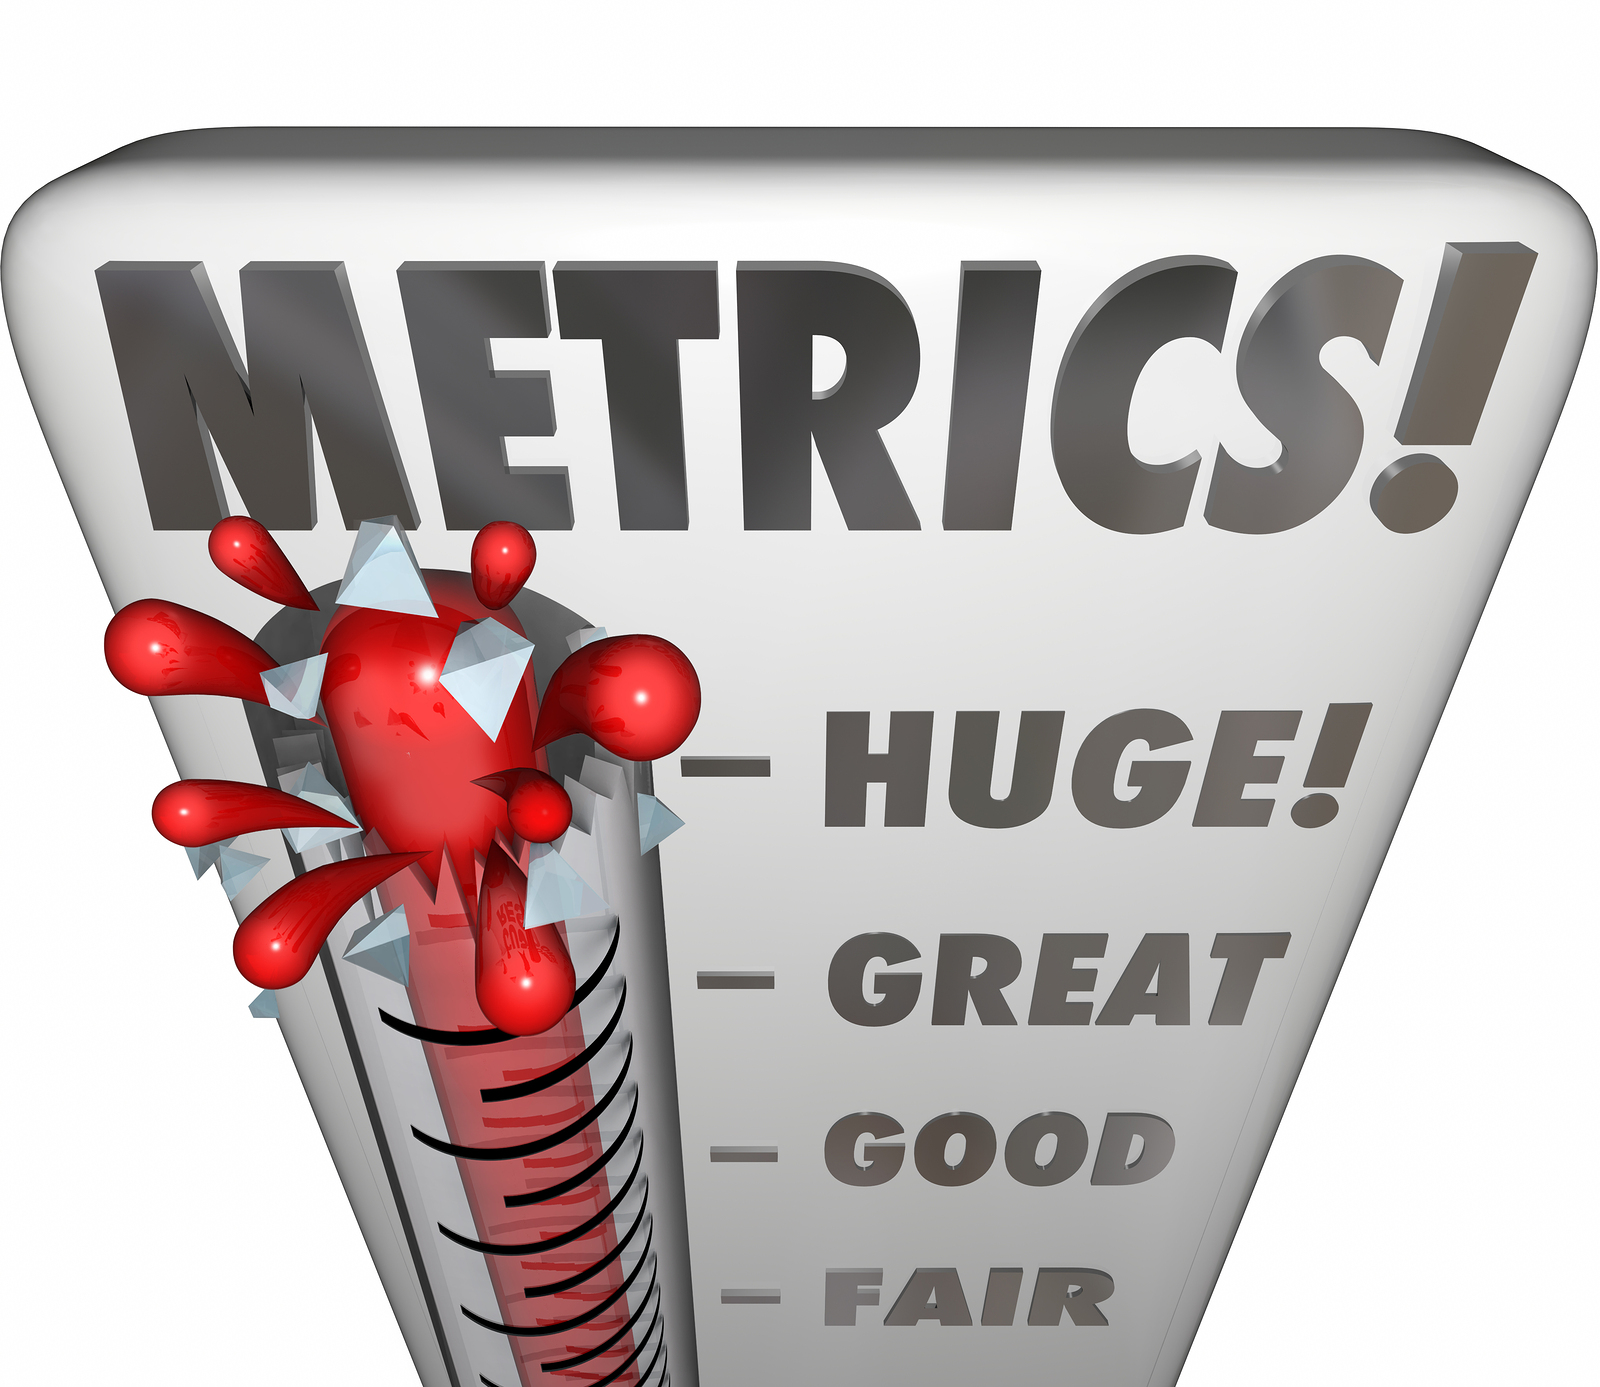 10-most-important-recruiting-metrics-small-business-applicant